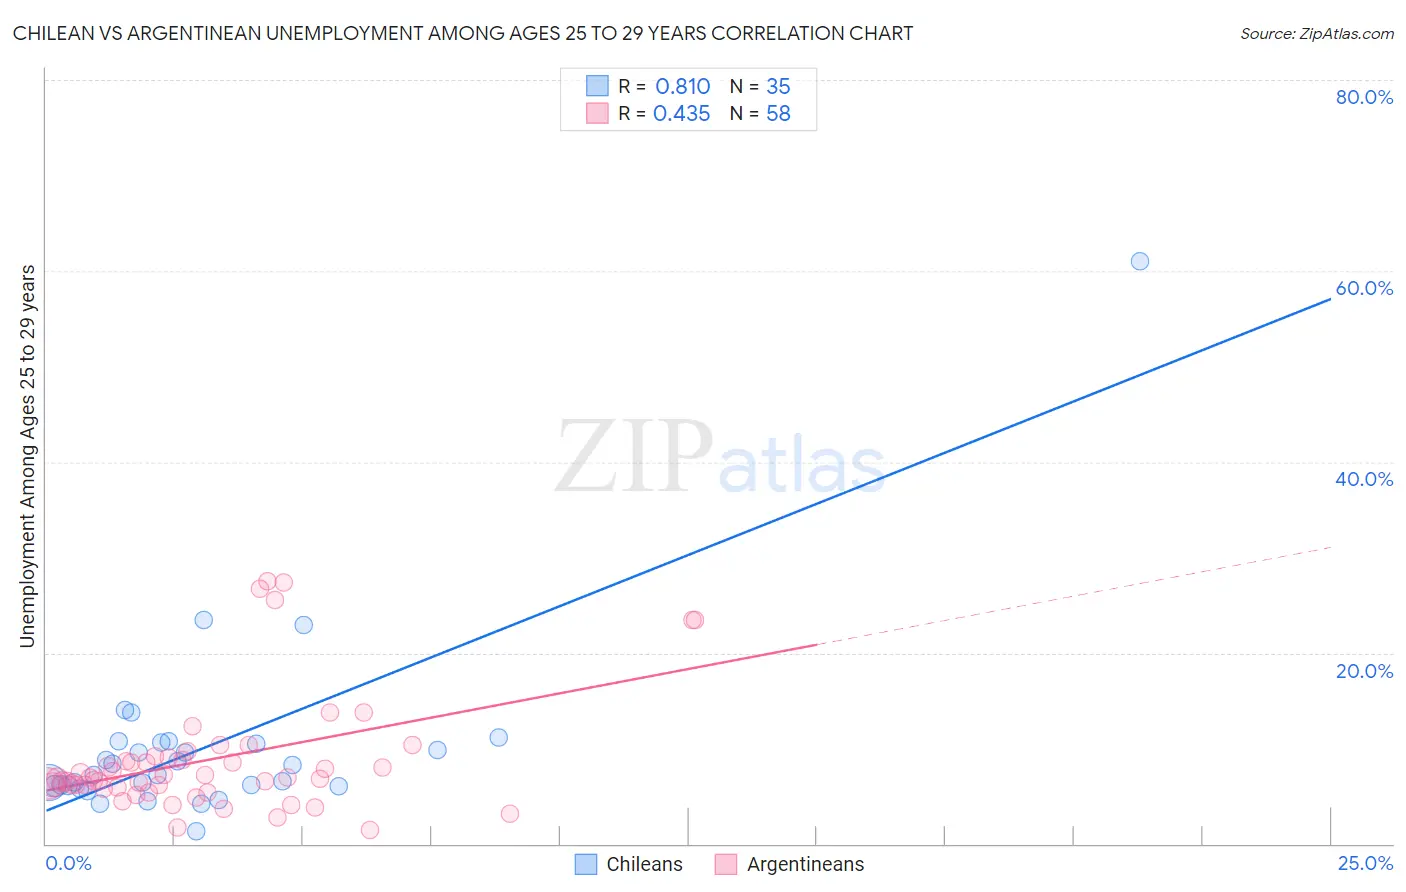 Chilean vs Argentinean Unemployment Among Ages 25 to 29 years